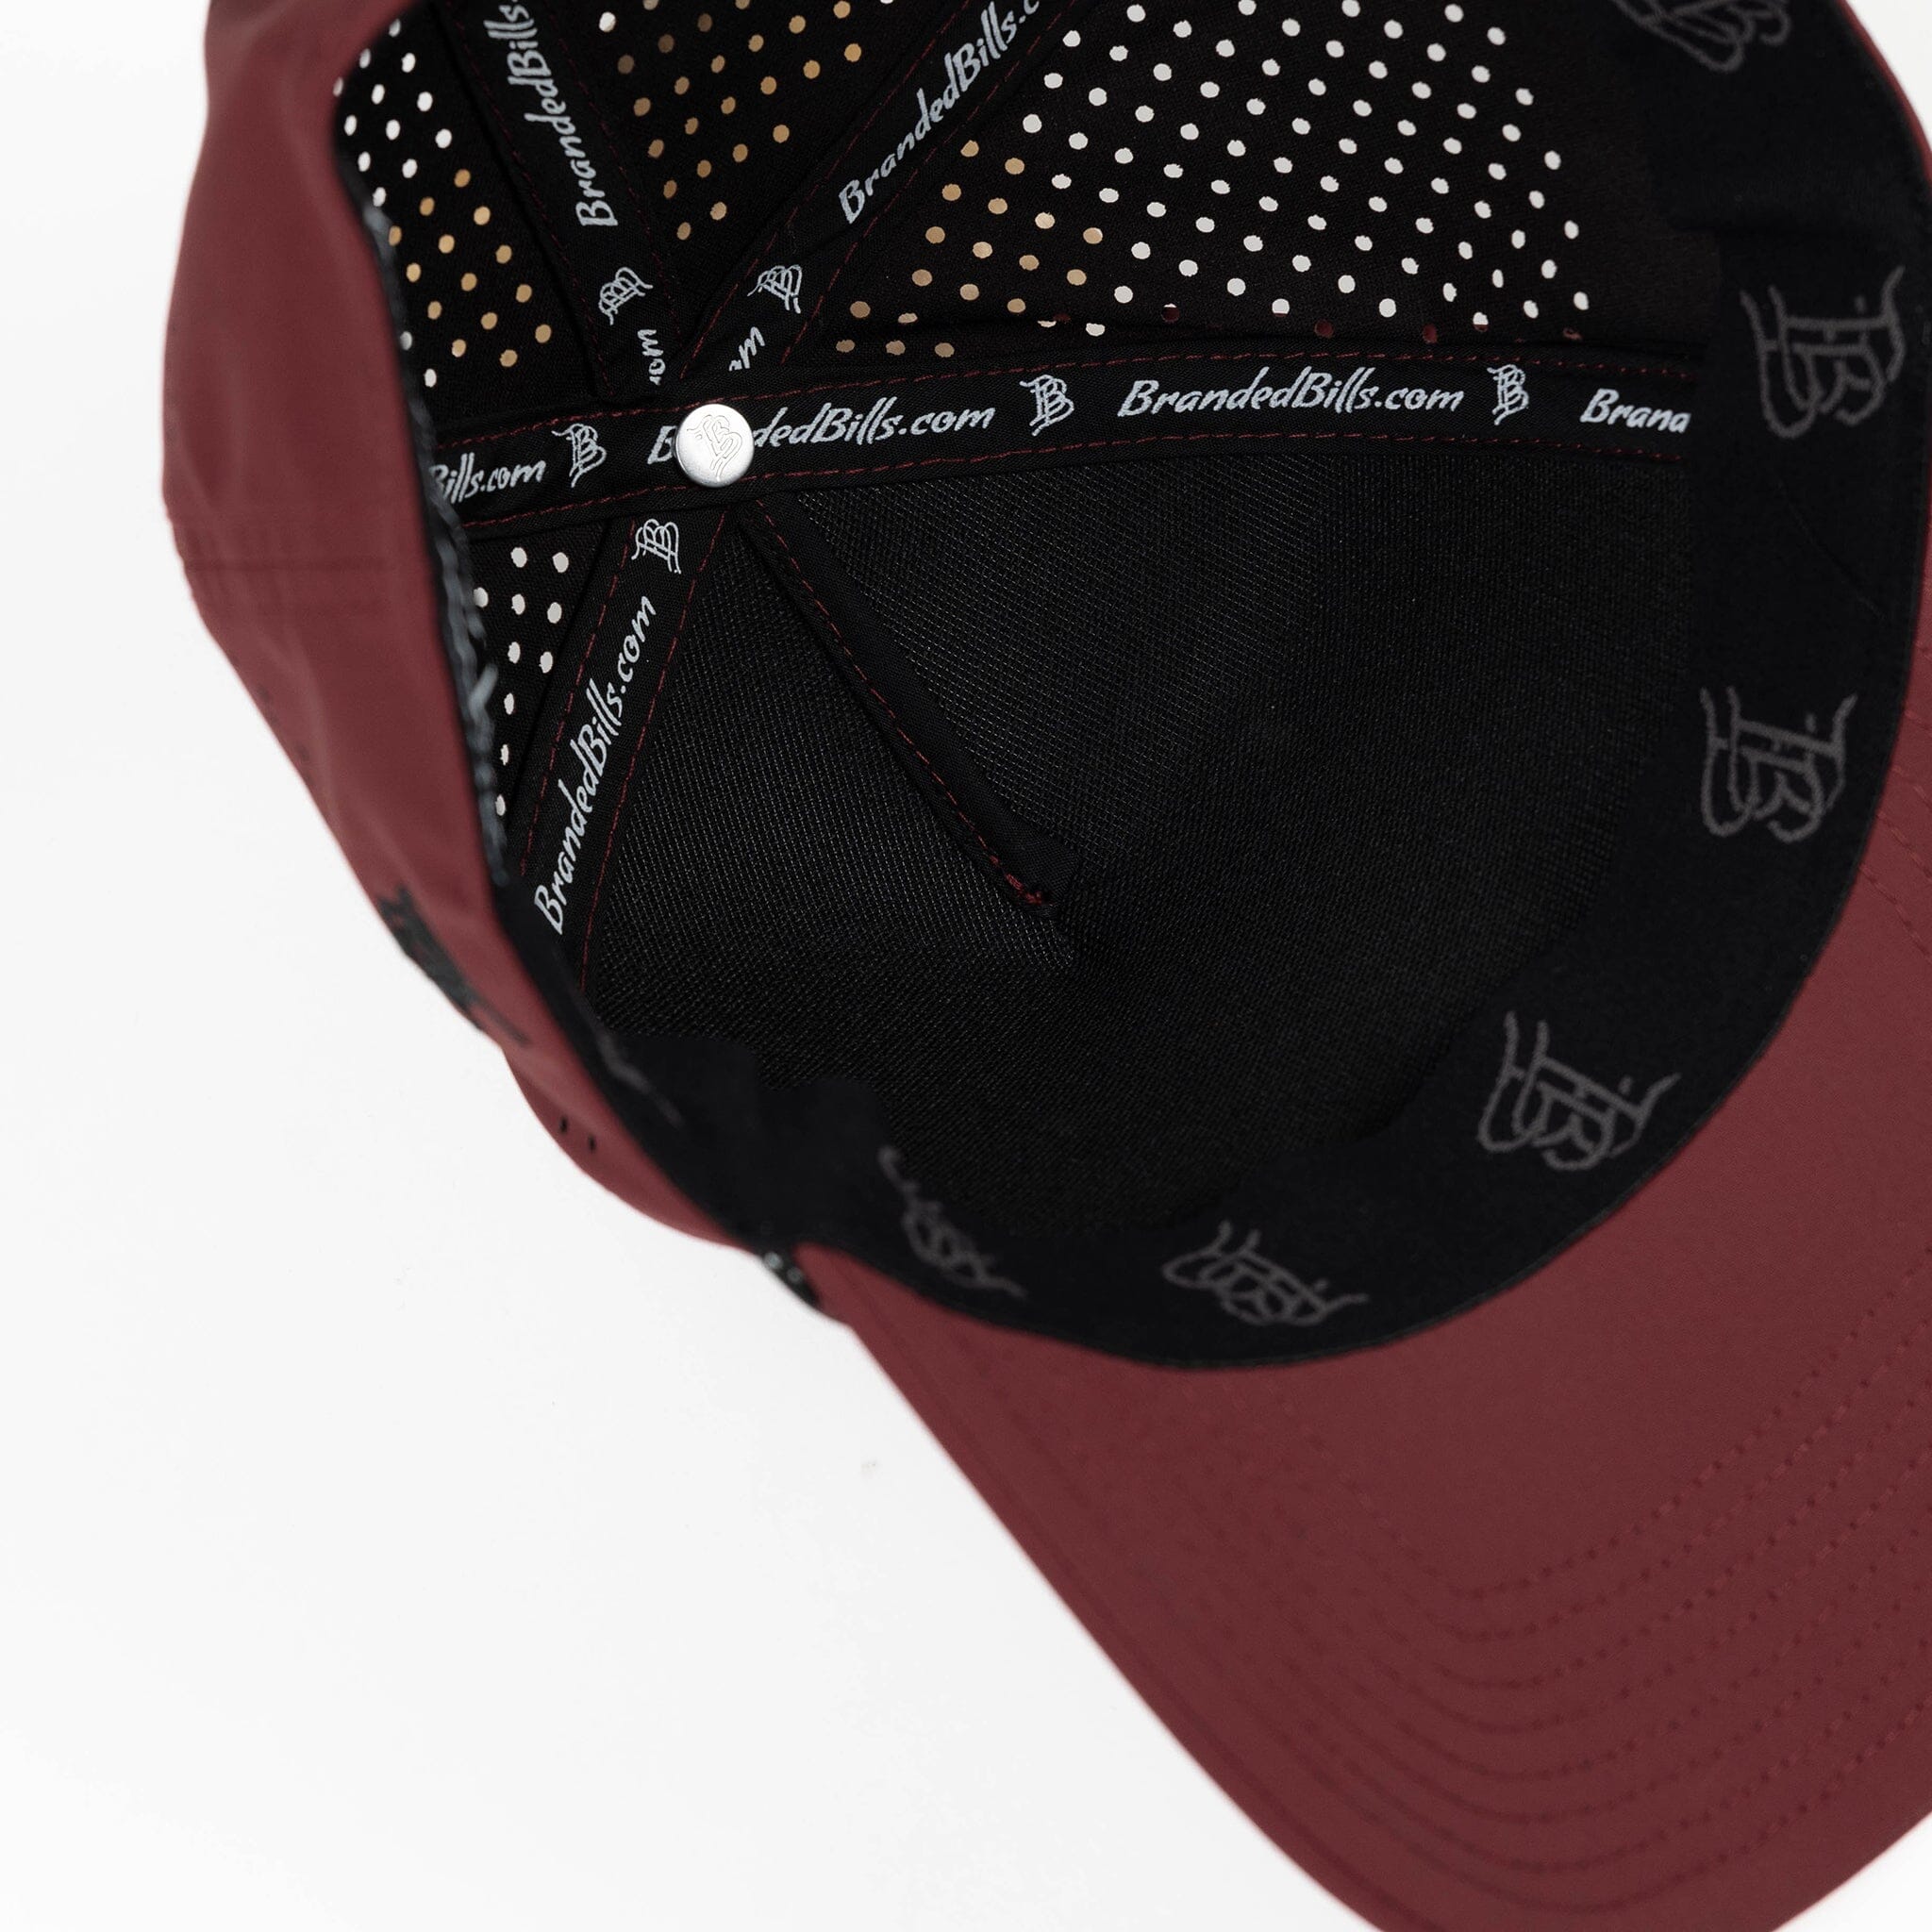 Party Eagle PVC Curved 5 Panel Performance Inside Maroon/Black